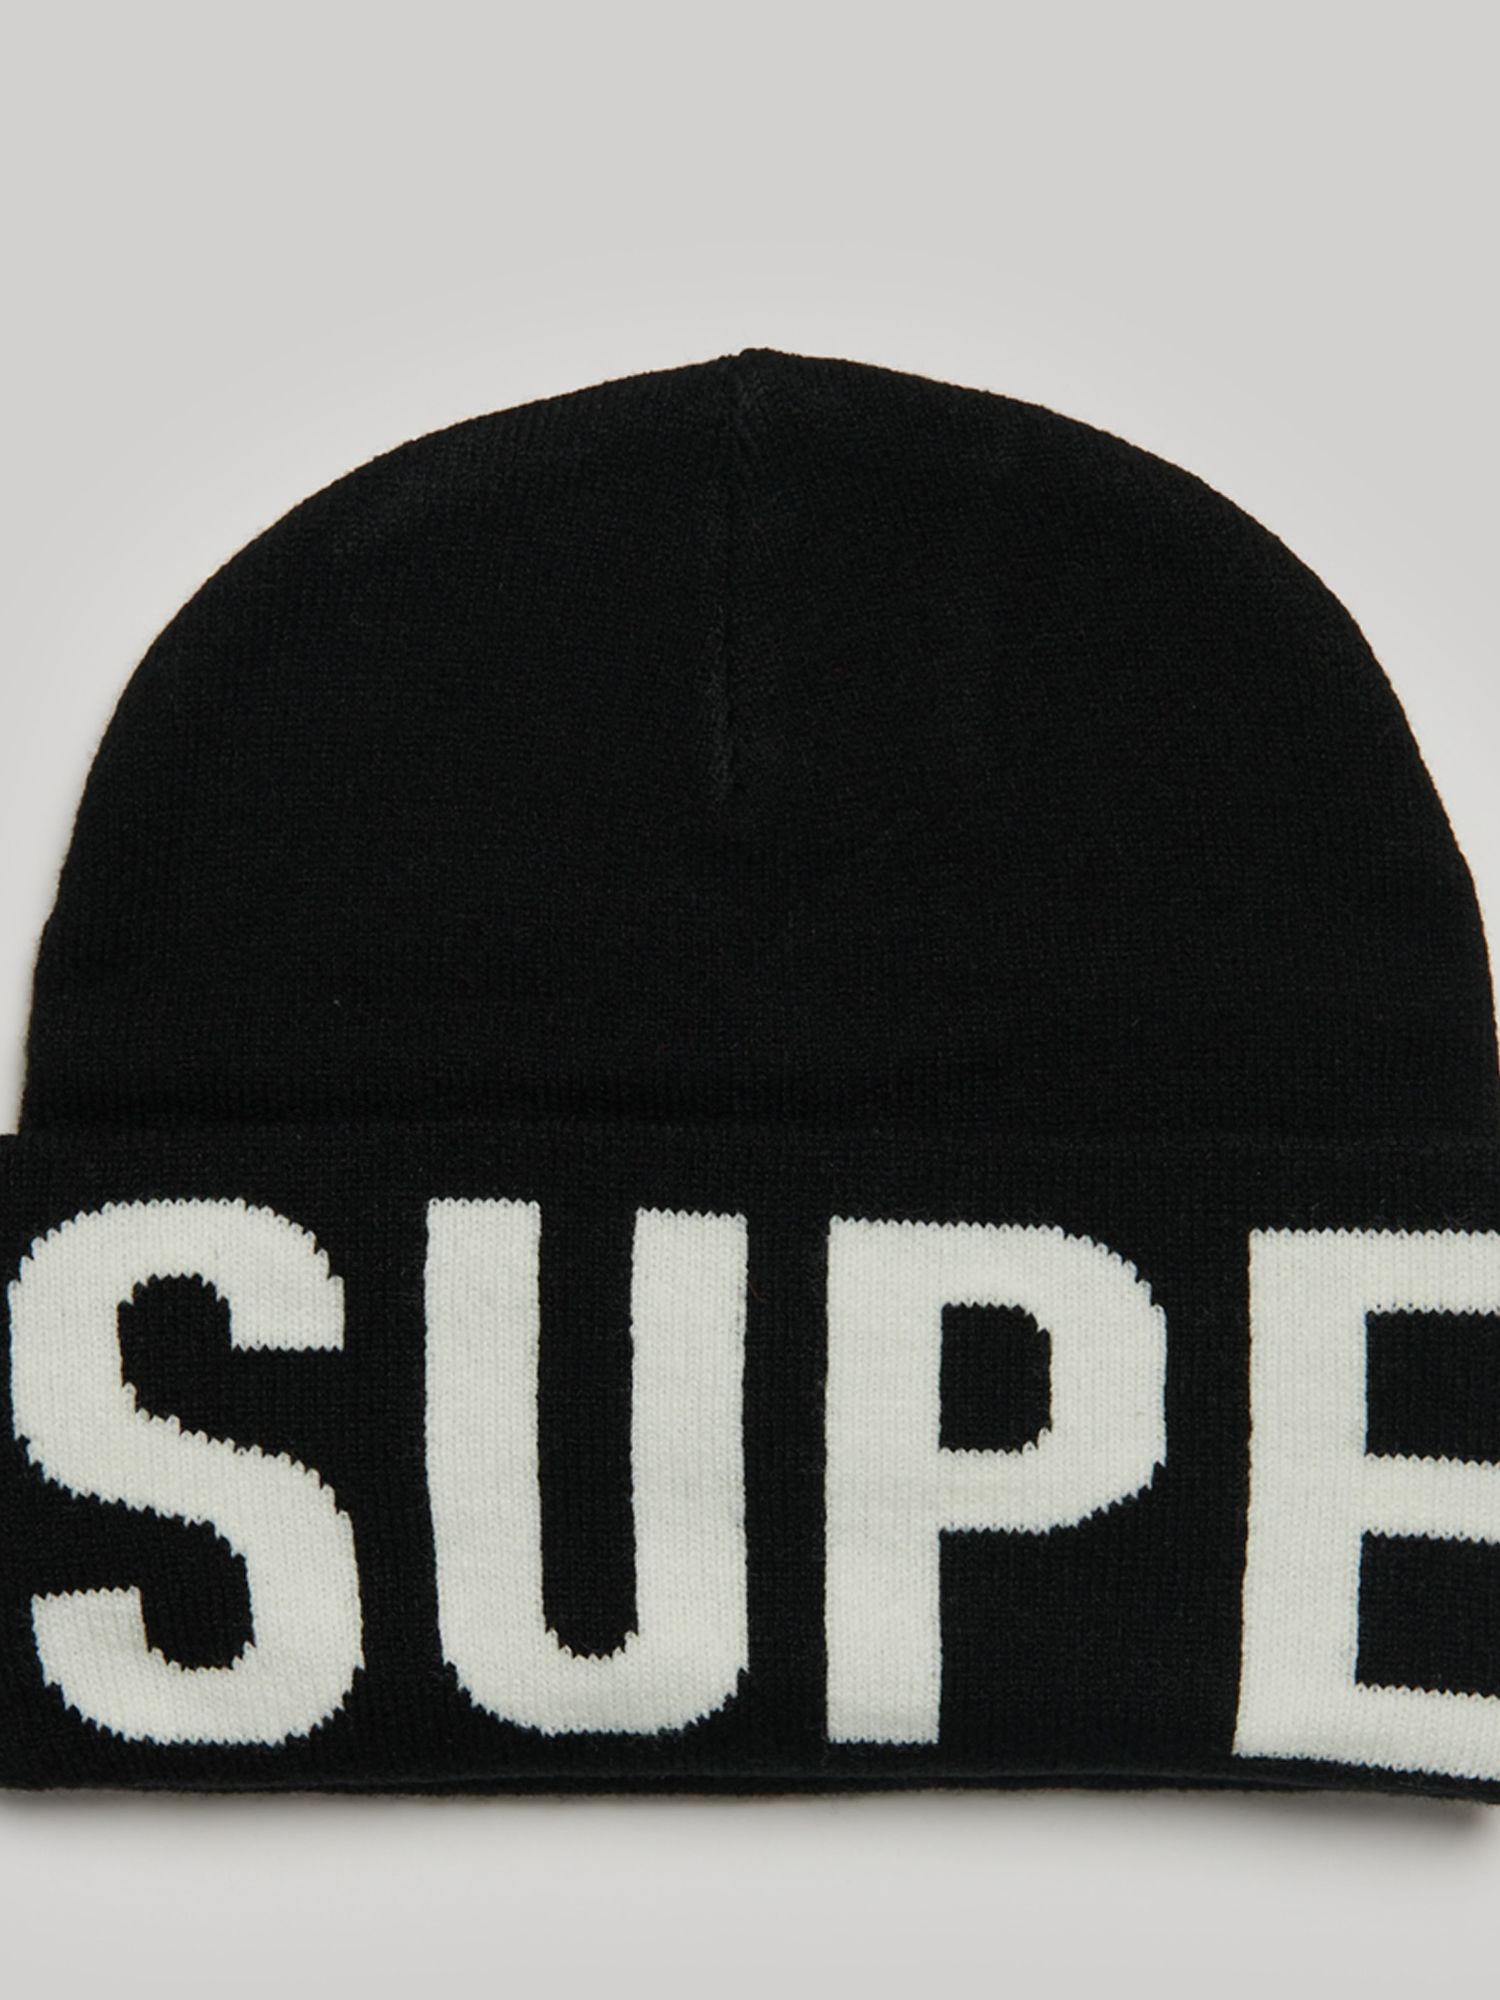 Superdry Branded Knitted Beanie, Black at John Lewis & Partners